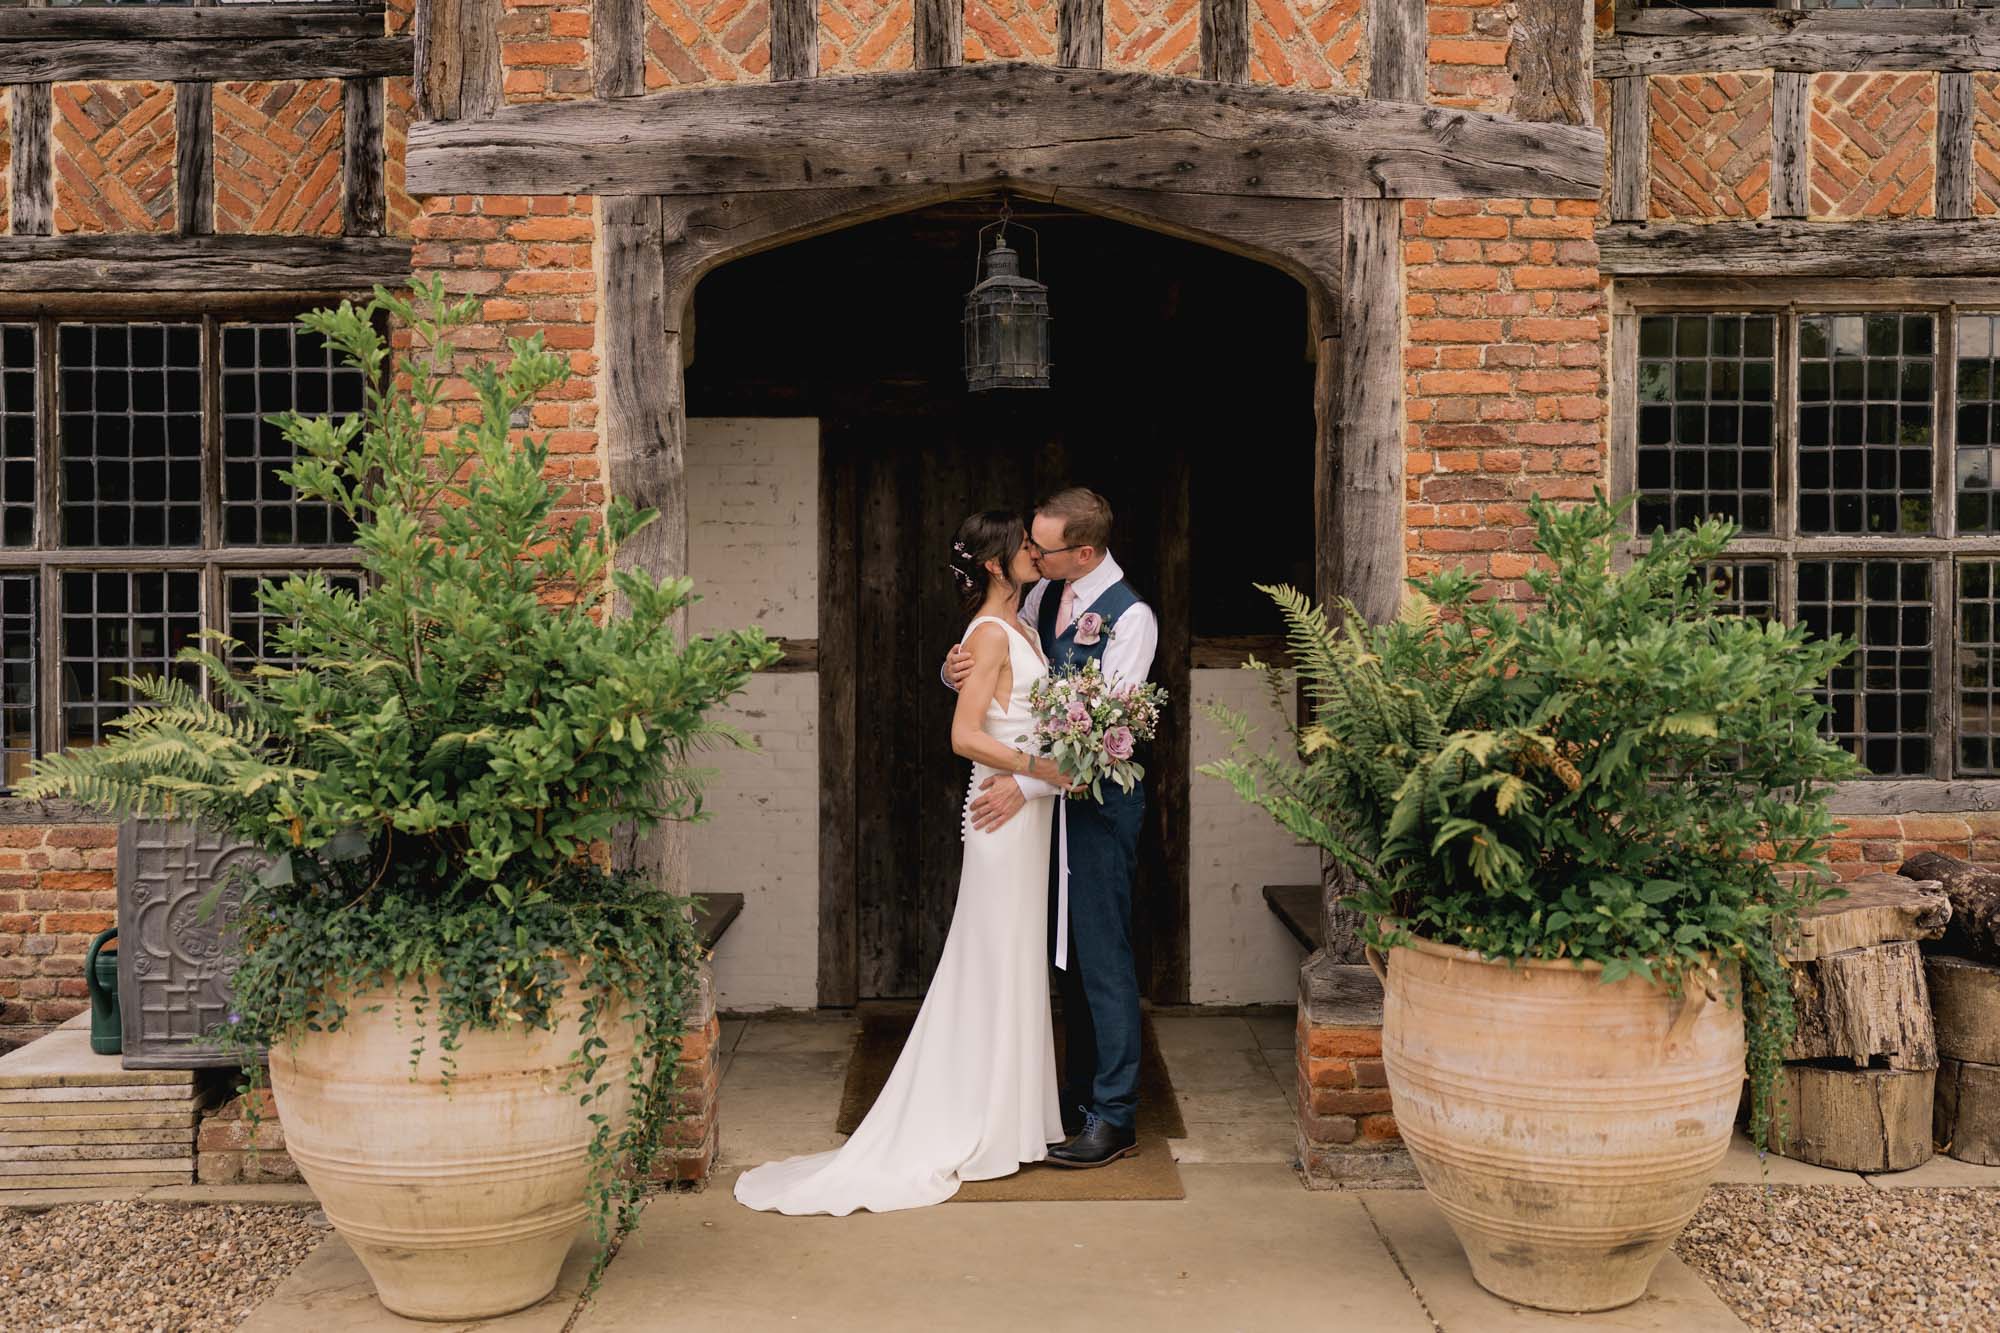 A bride and groom share a kiss in the doorway at Dorney Court in Buckinghamshire.